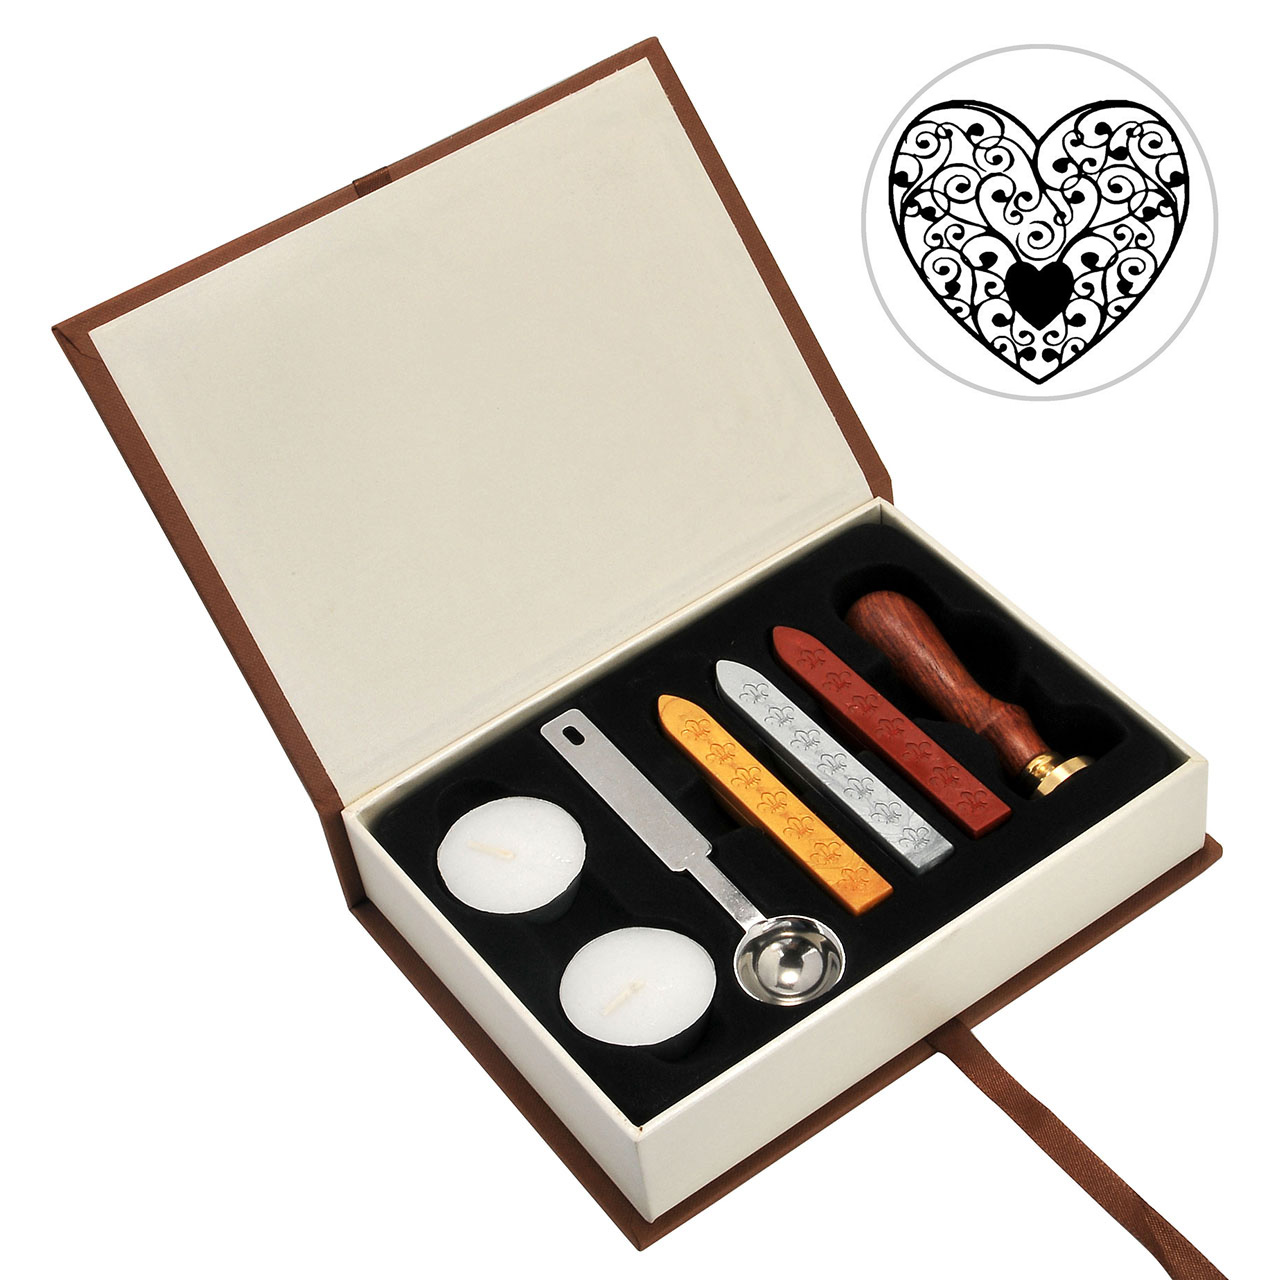 Heart Wax Seal Stamp Set, Yoption Classic Vintage Seal Wax Stamp Set, Retro Seal Stamps Maker Gift Box Set (Heart)